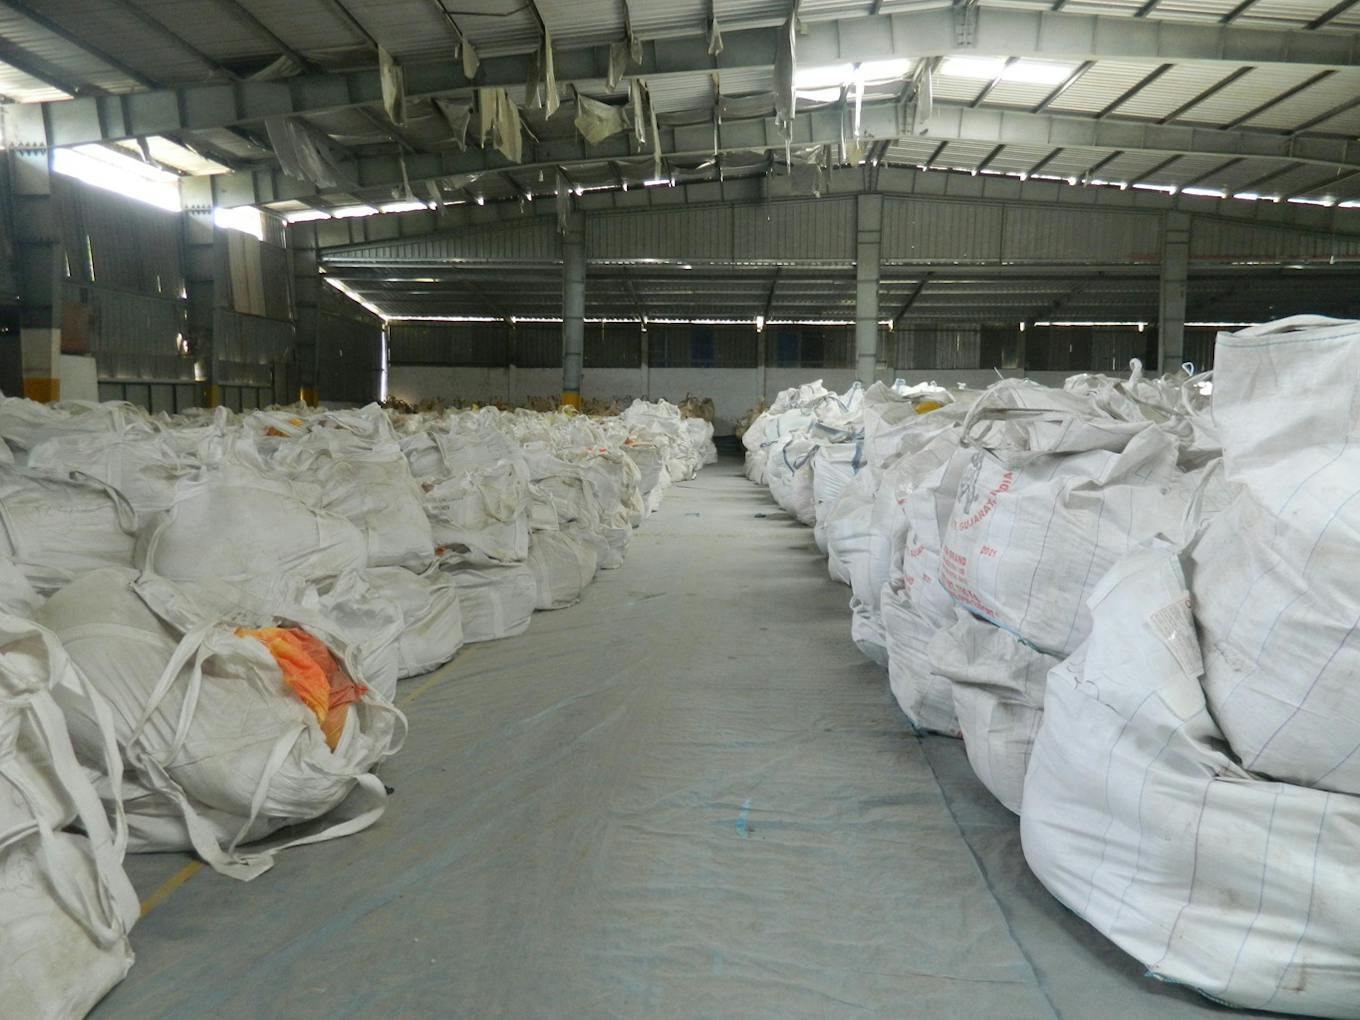 A warehouse full of collected debris from the X-Press Pearl spill.